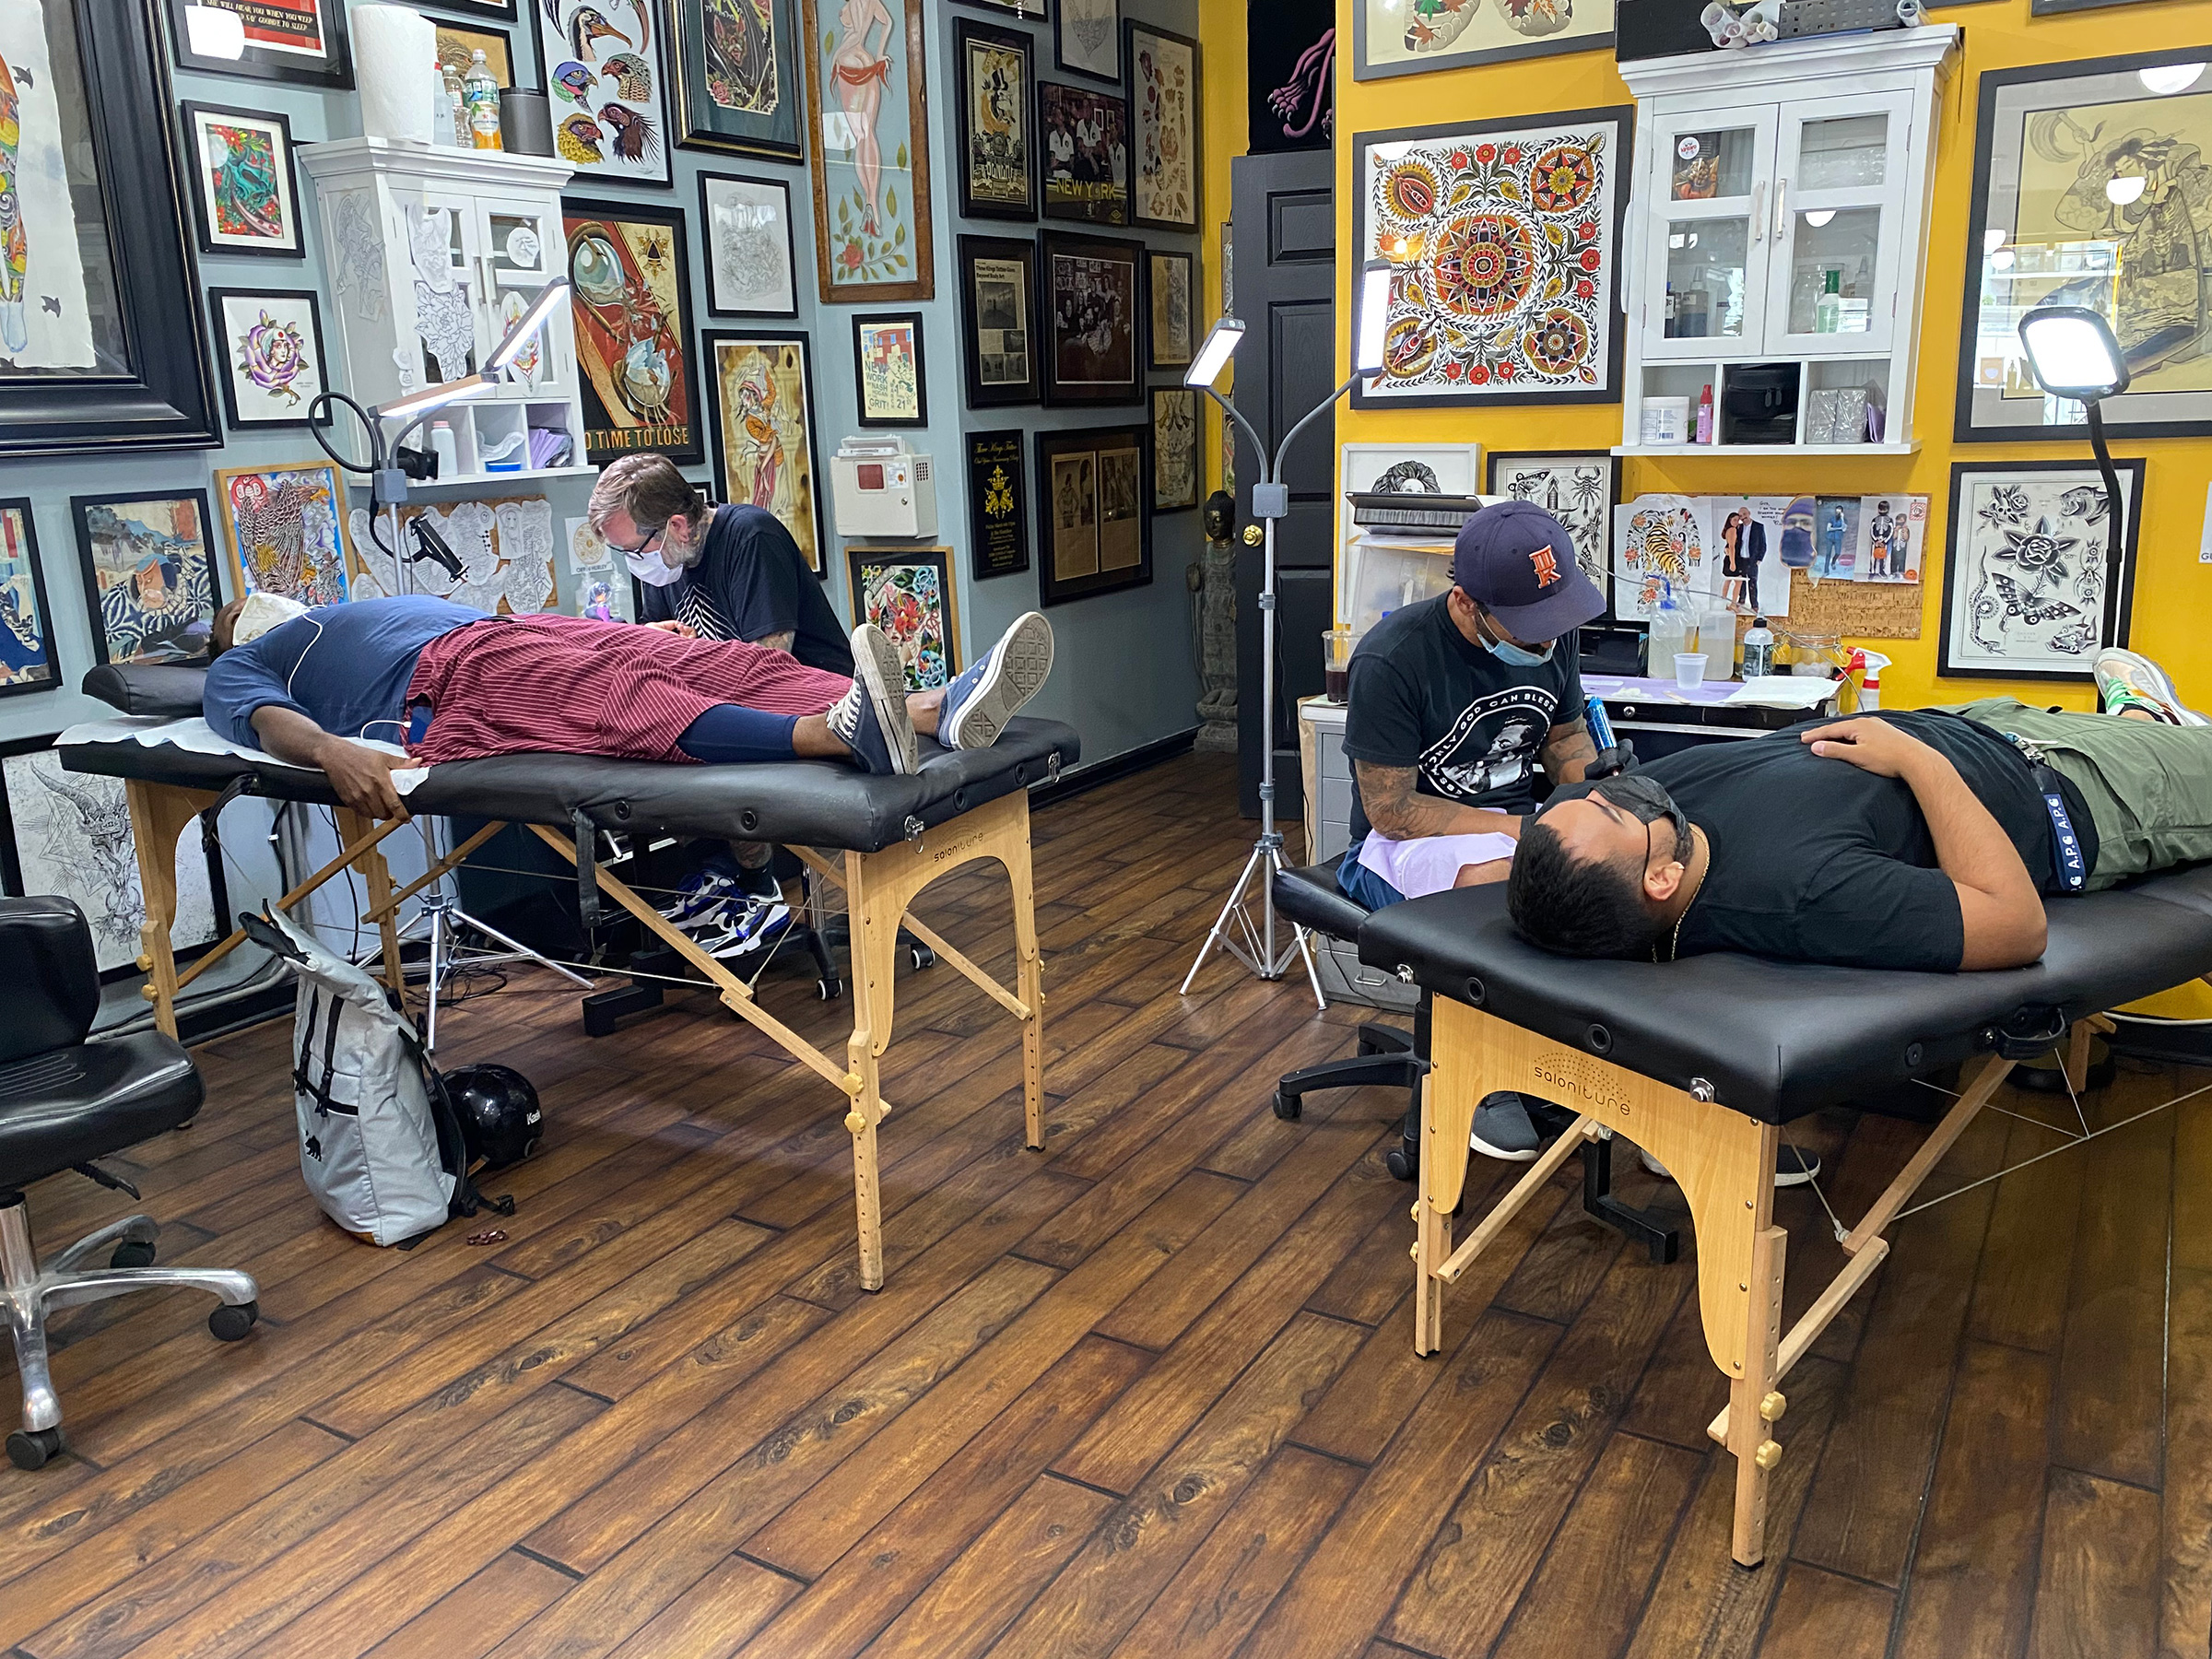 Clients and tattoo artists at Three Kings Tattoo (Courtesy Three Kings Tattoo)